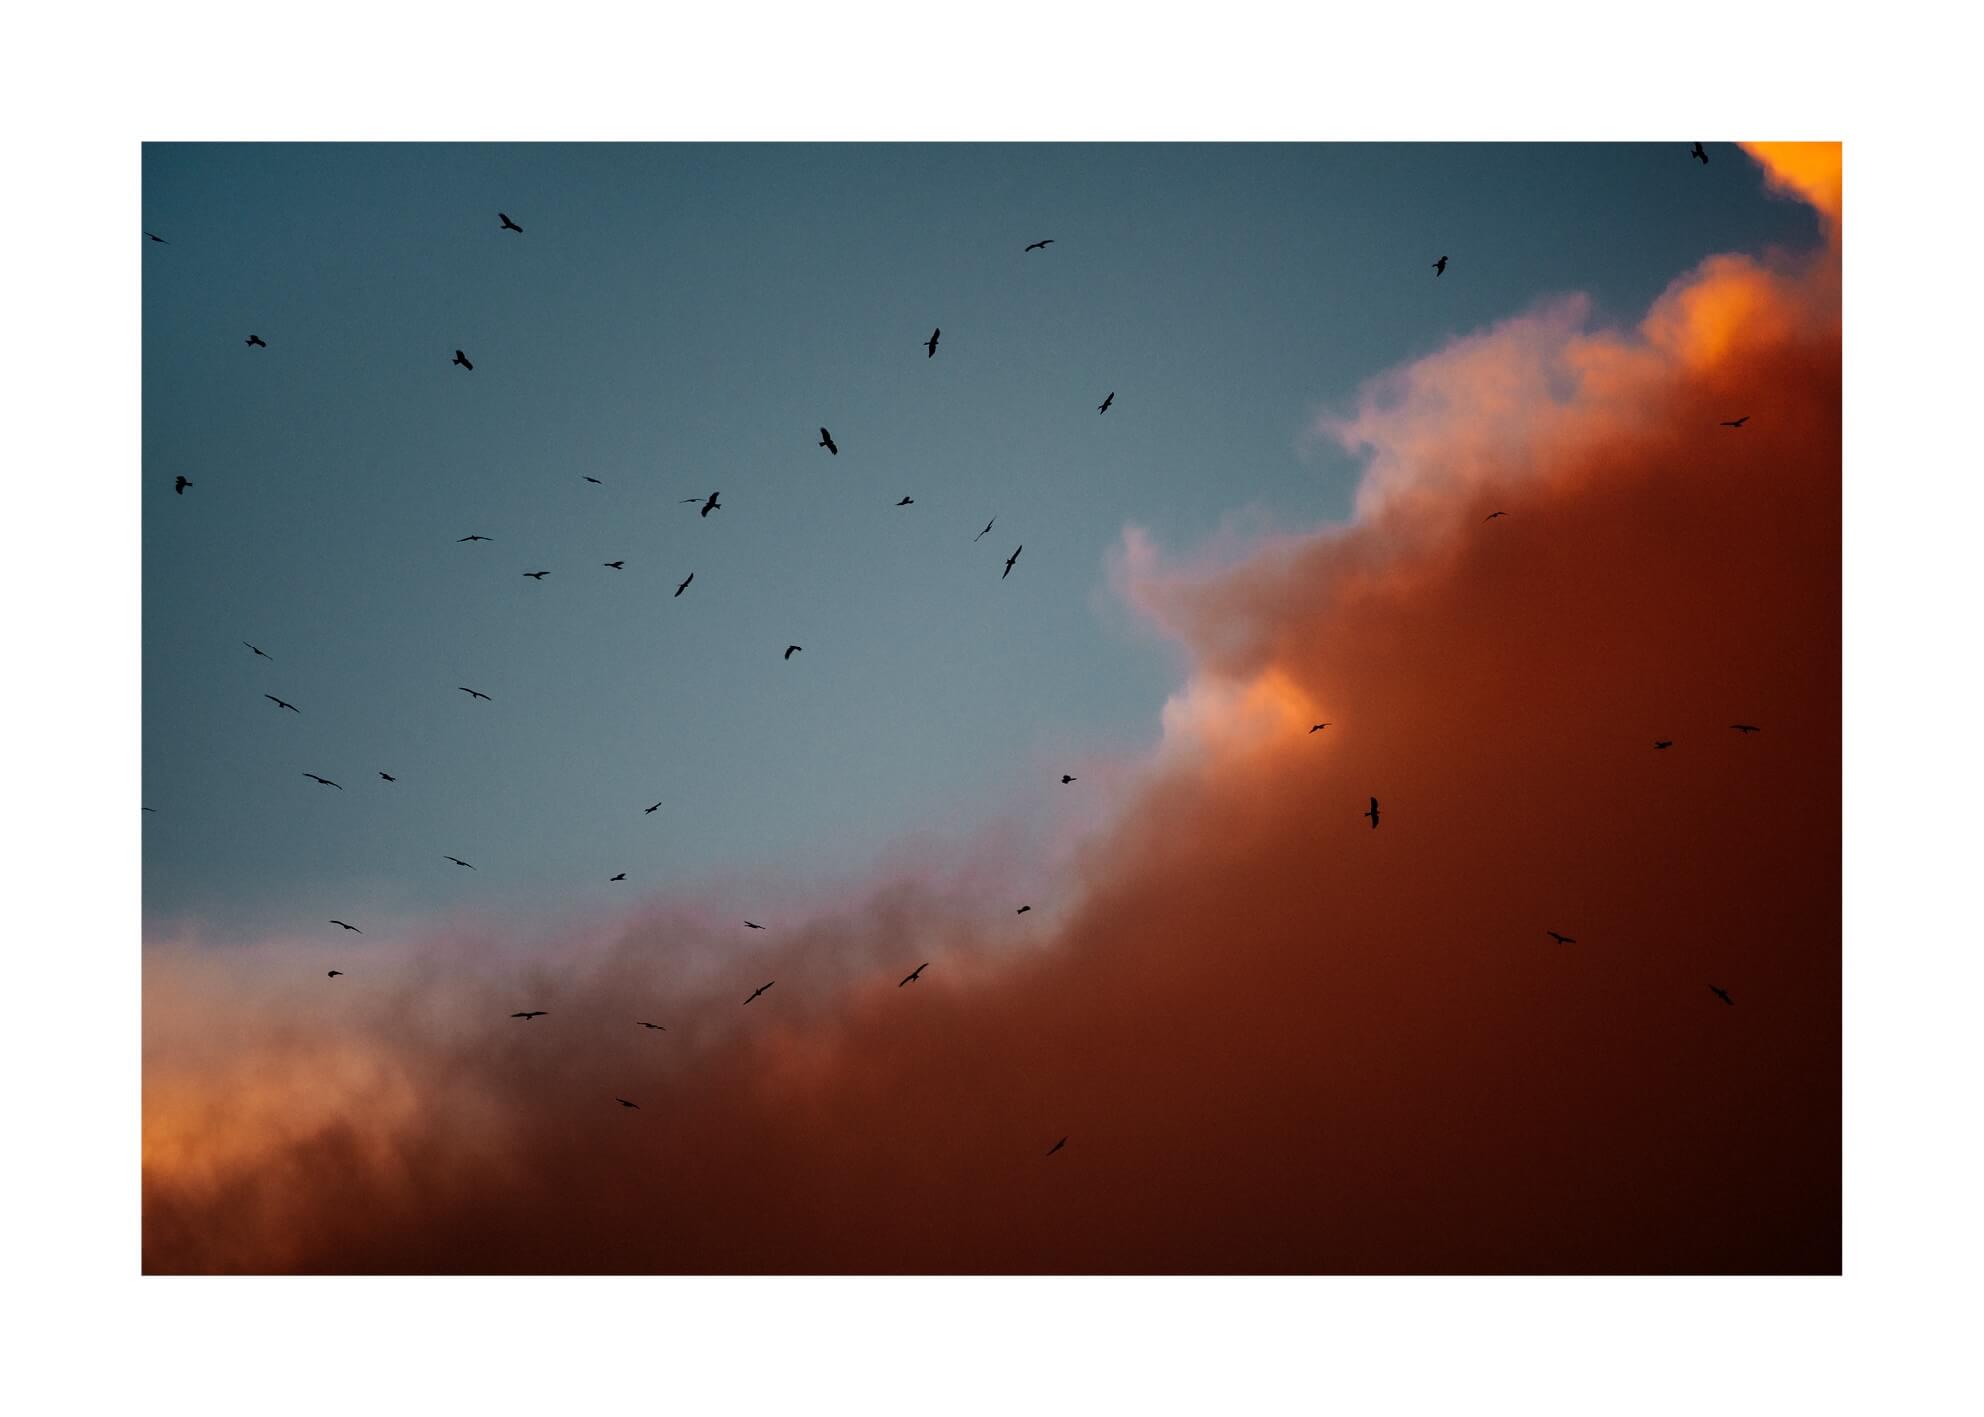 Flight at dusk by artist rowan thornhill in size 50x70 cm. Affordable art sold in open edition.